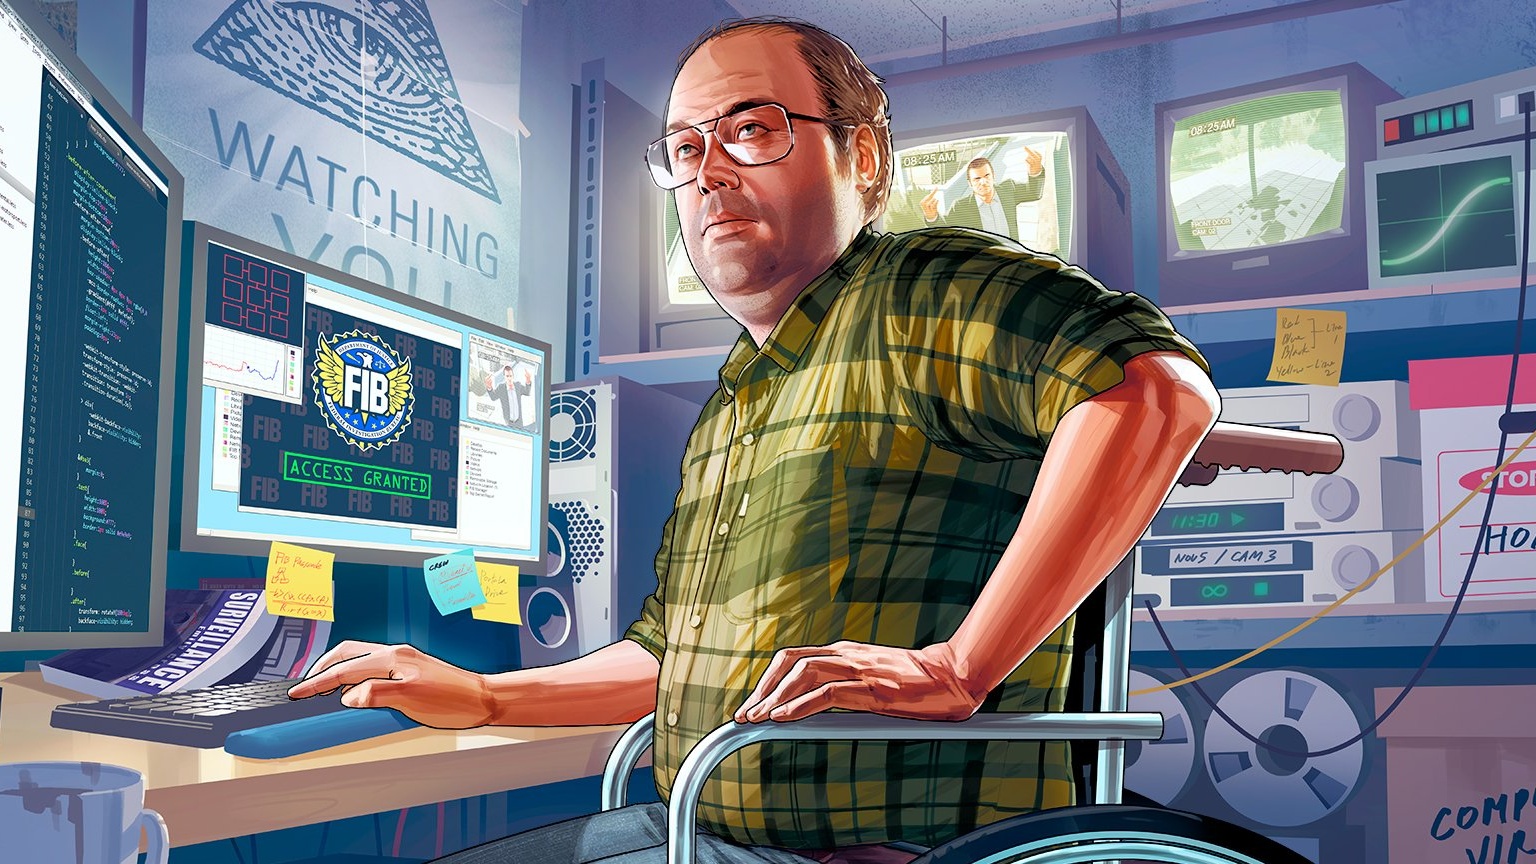 An image of Lester from GTA 5, surrounded by hardware.